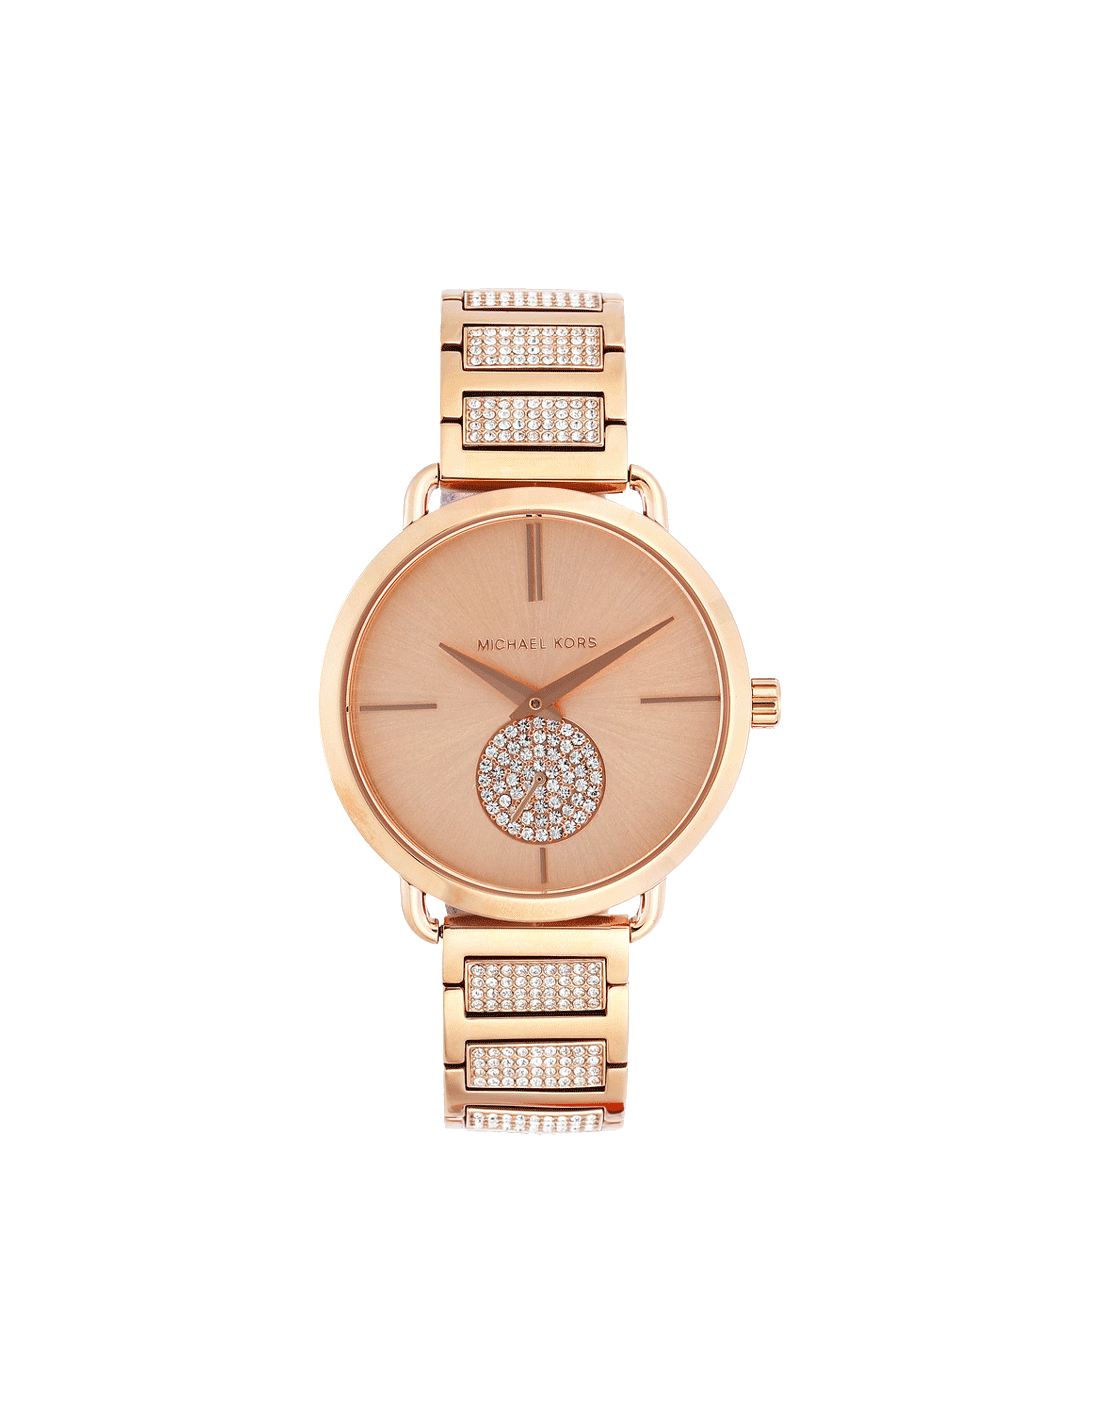 Buy Michael Kors MK3853 Watch in India I Swiss Time House